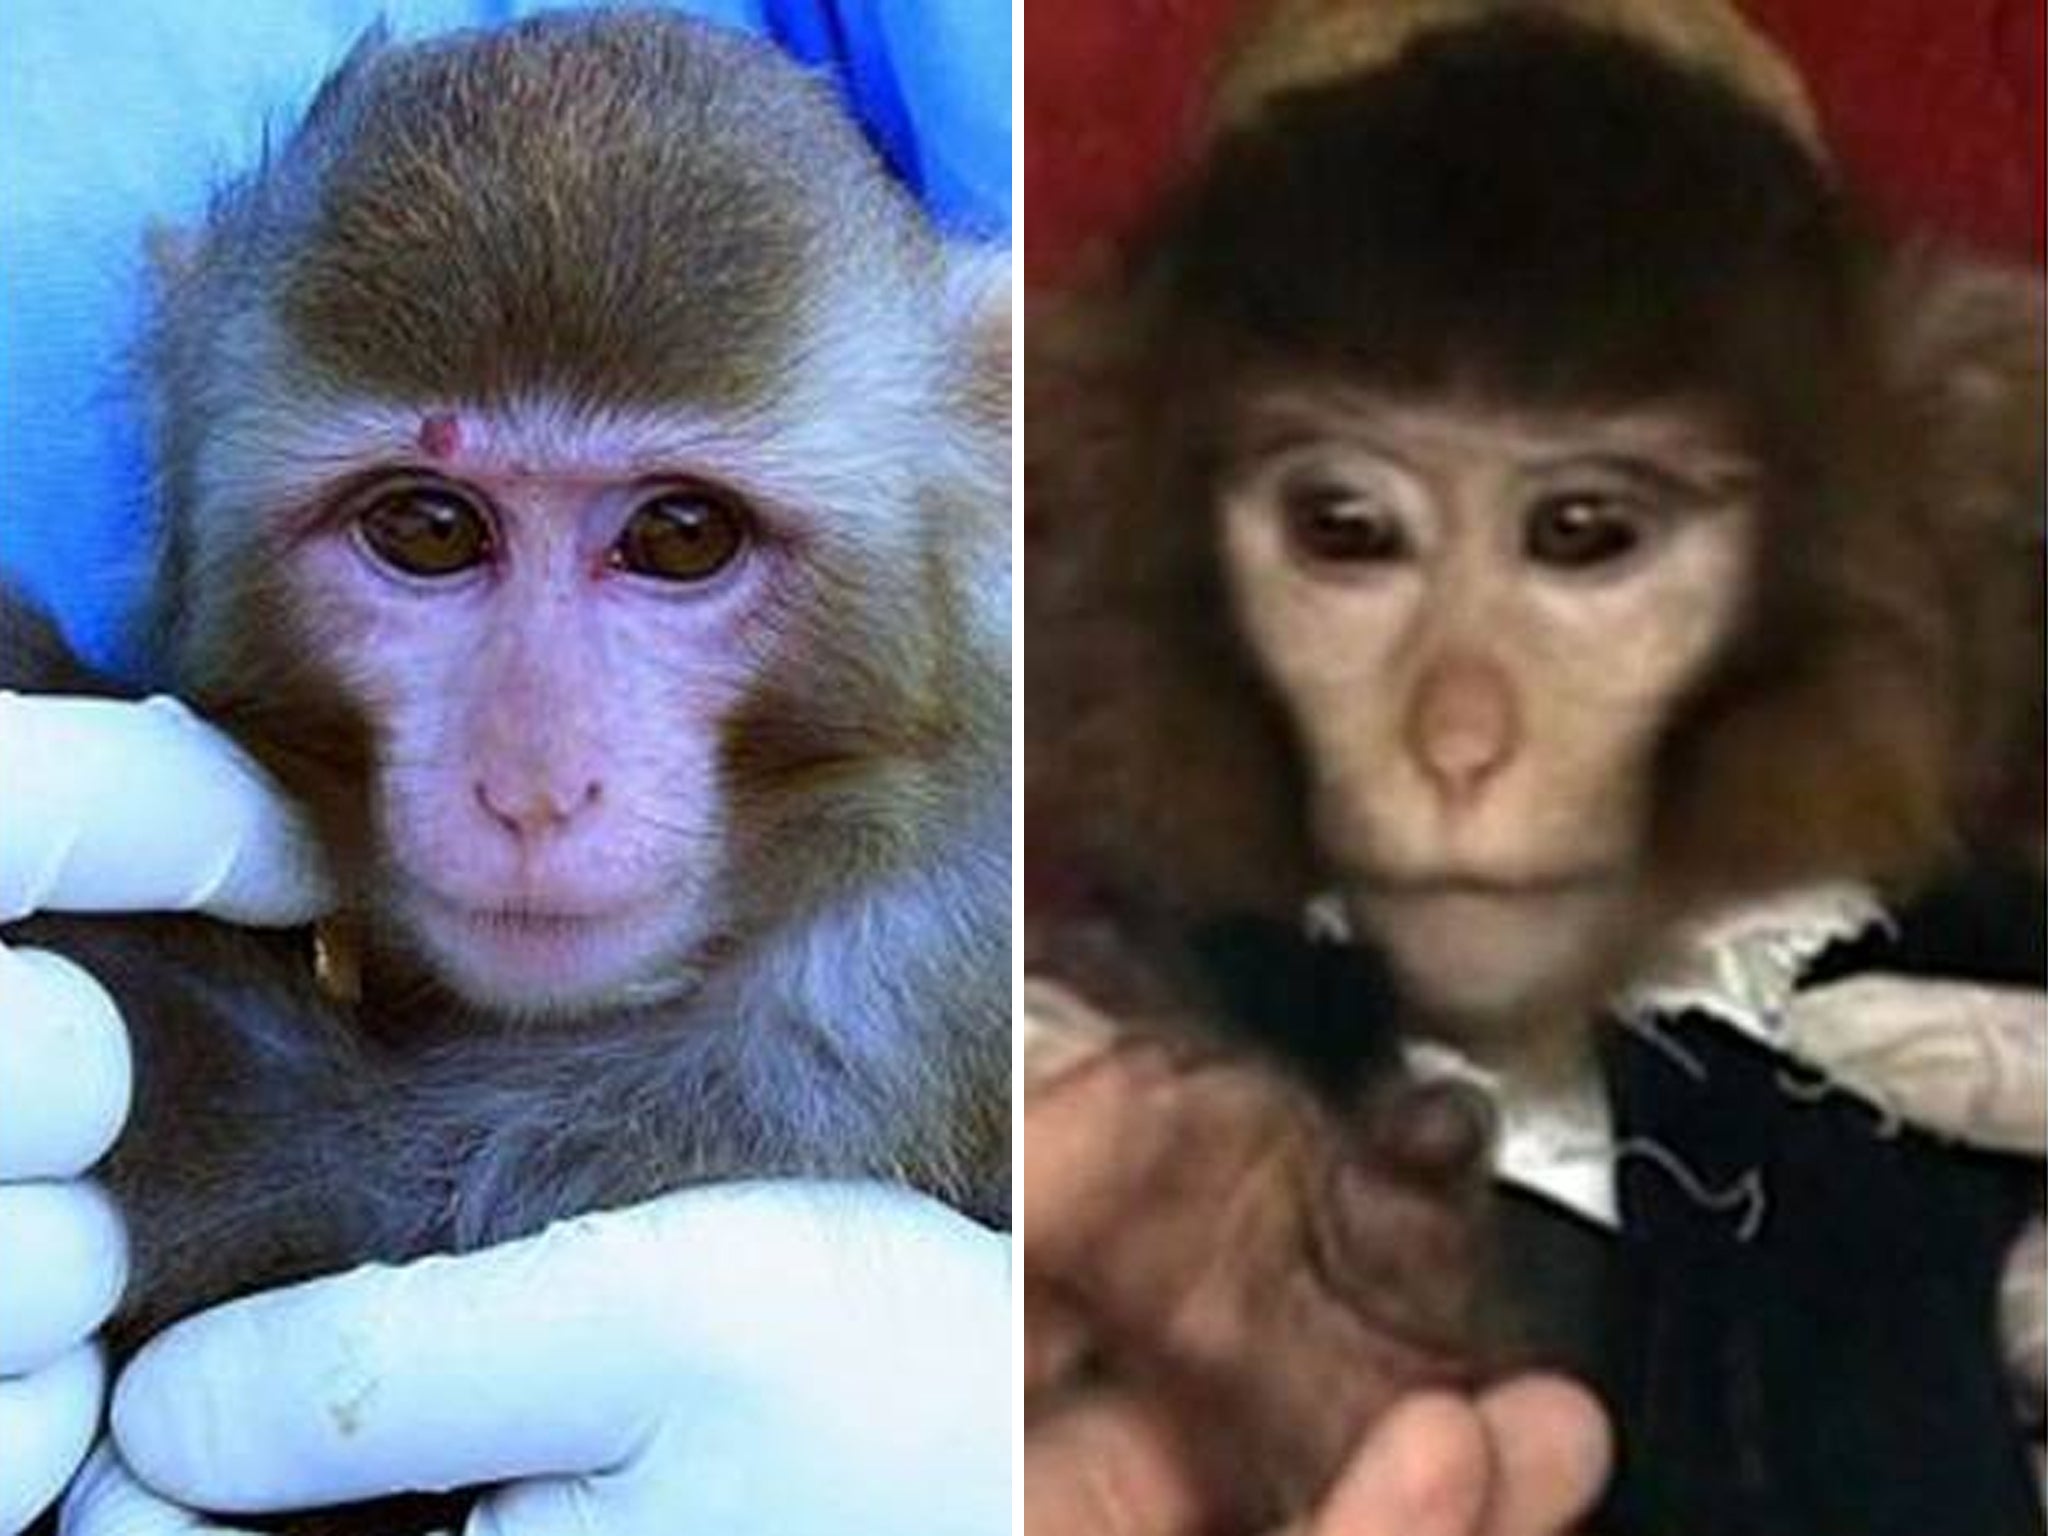 Images Iran initially claimed were the same monkey, but were forced to admit were different.